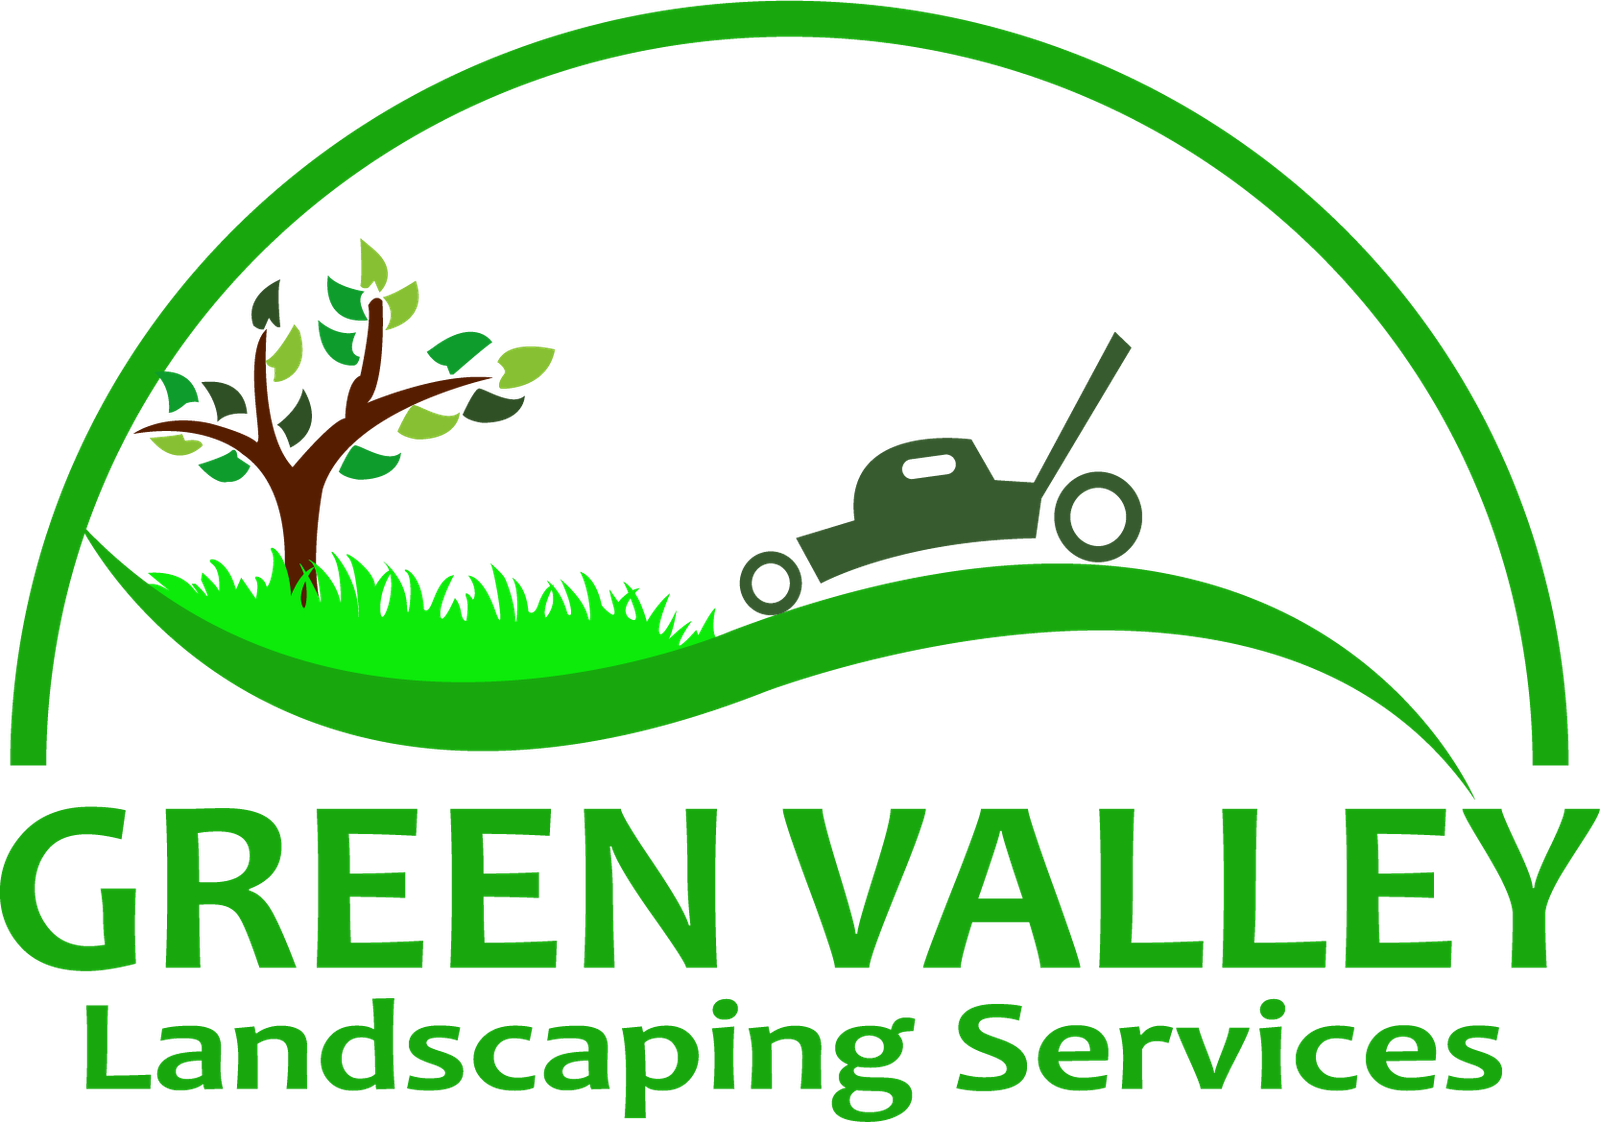 Green Valley Landscaping Services